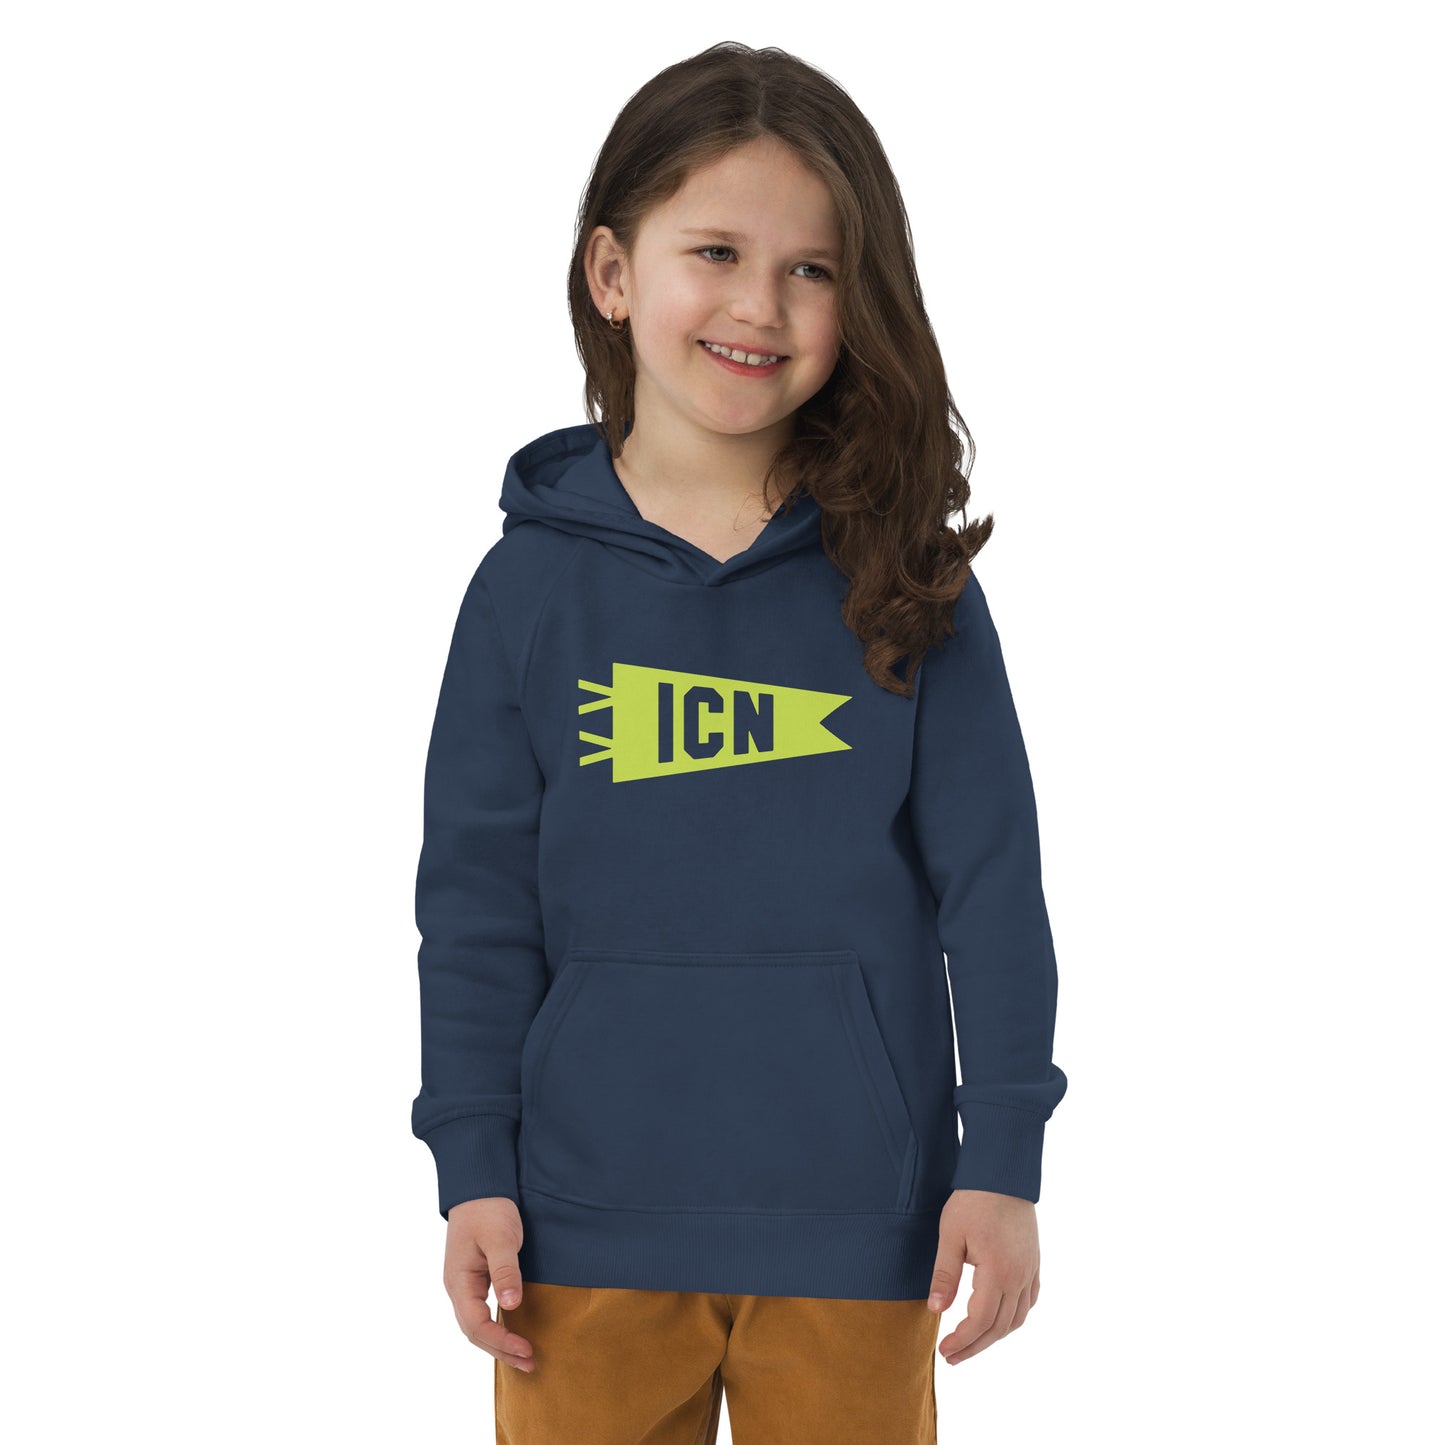 Kid's Sustainable Hoodie - Green Graphic • ICN Seoul • YHM Designs - Image 07